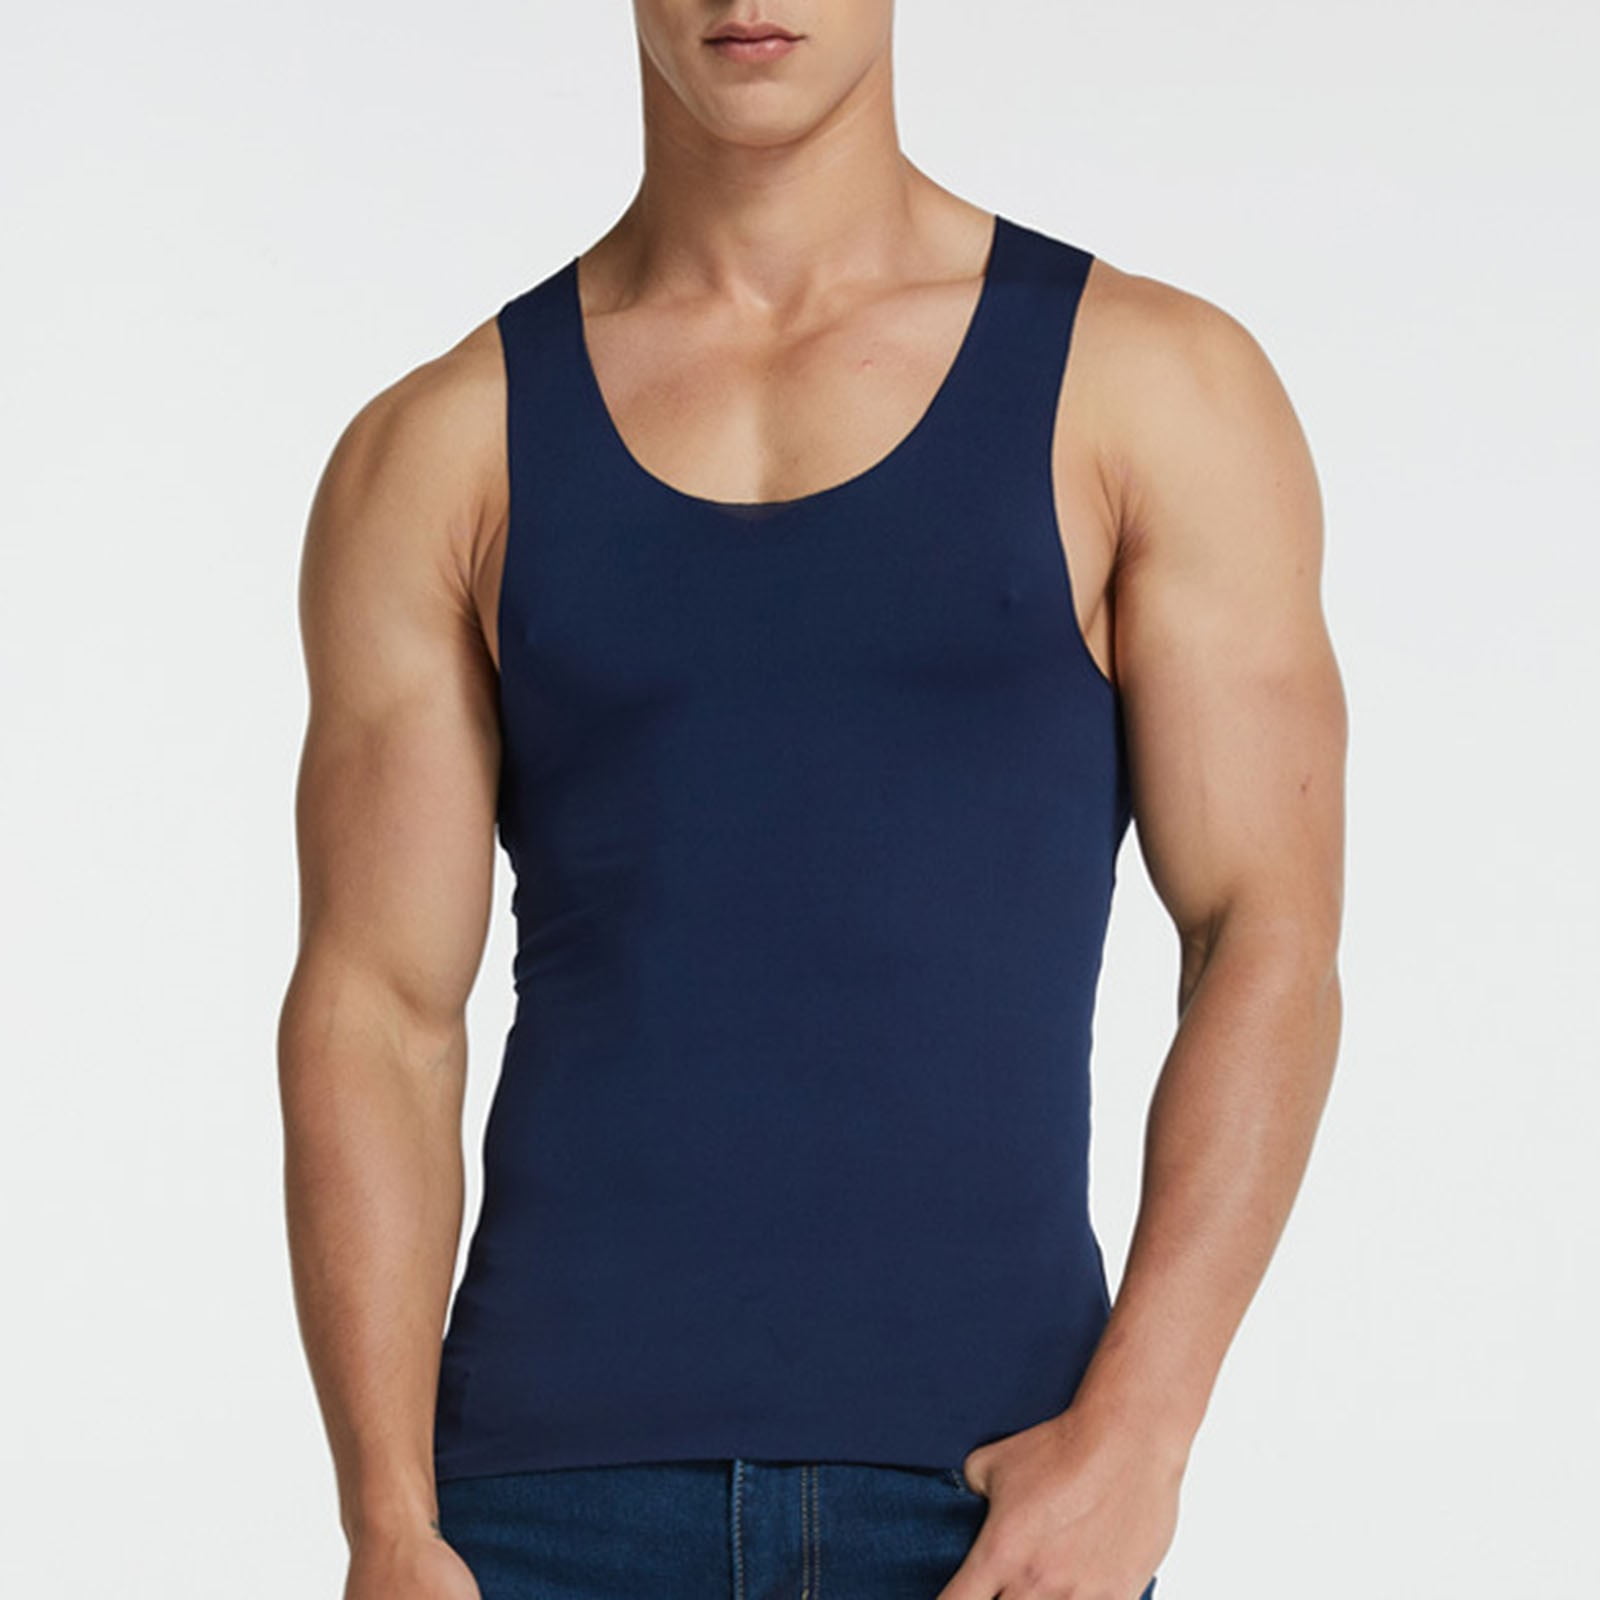 Grey Tank Top Men's Ice Silk Vest Fitness Narrow Shoulder Running Sports  Seamless Quick Drying Inside And Outside Wear Summer Youth.